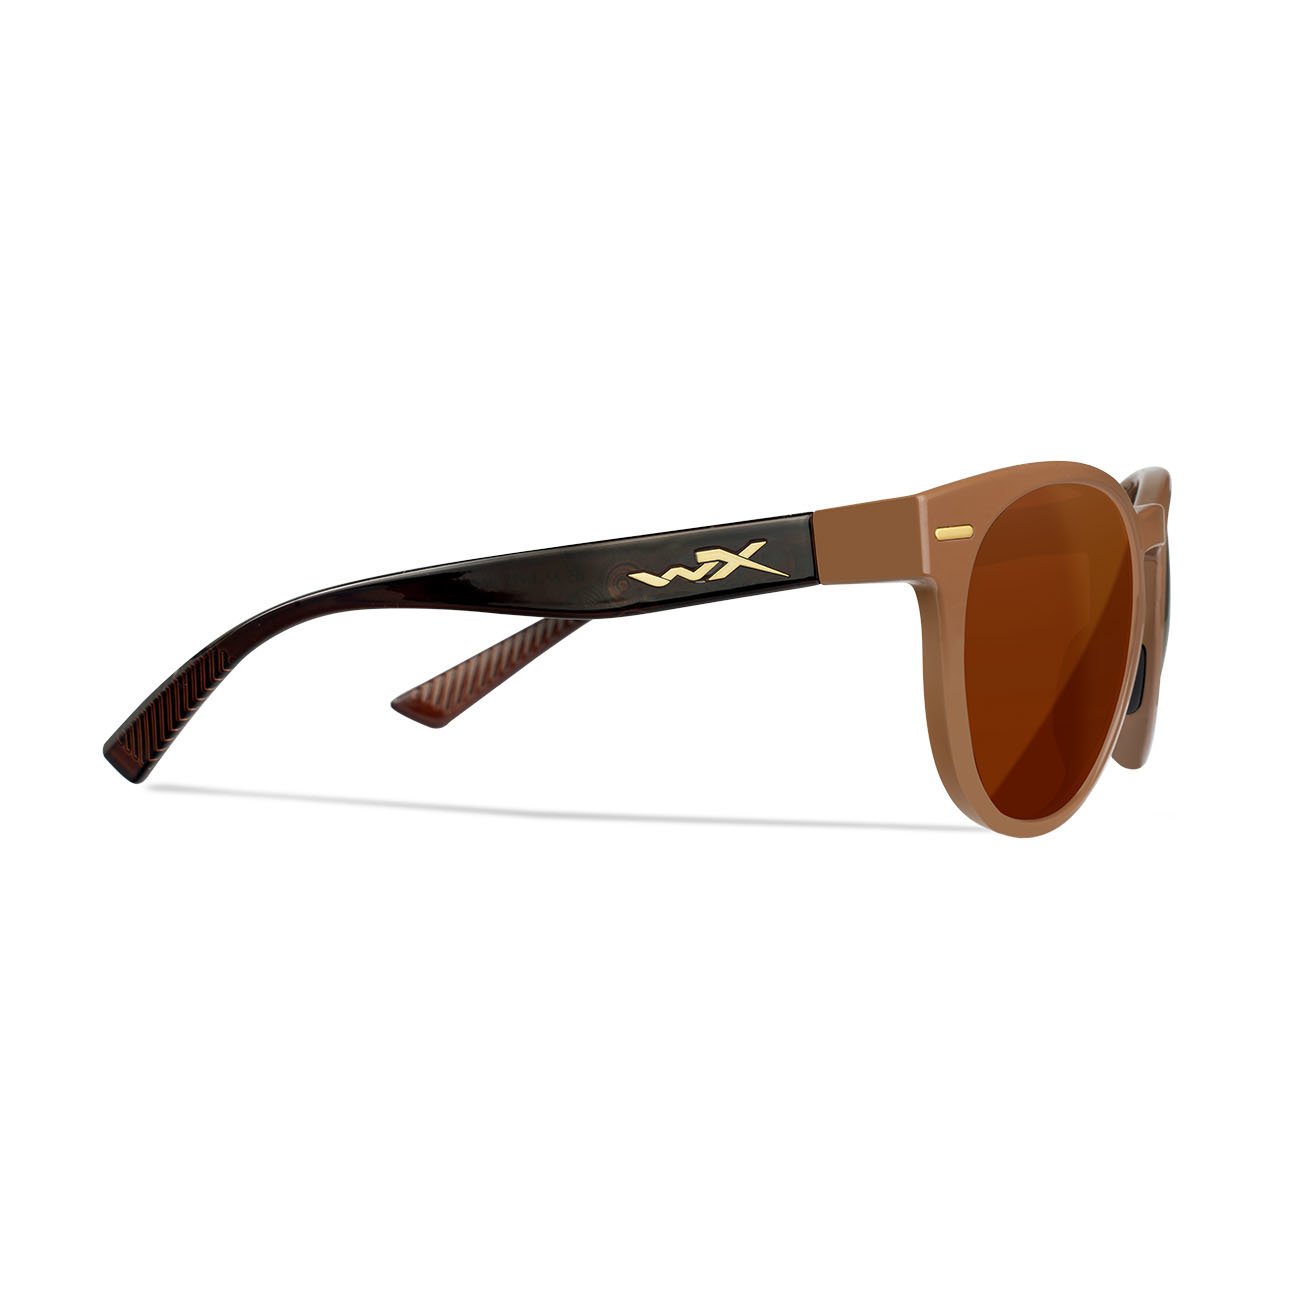 Wiley-X-COVERT-Captivate-Polarized-Copper-Gloss-CoffeeCrystal-Brown-Frame-CarpStore.pl-Europe-Online-Carp-Shop-4